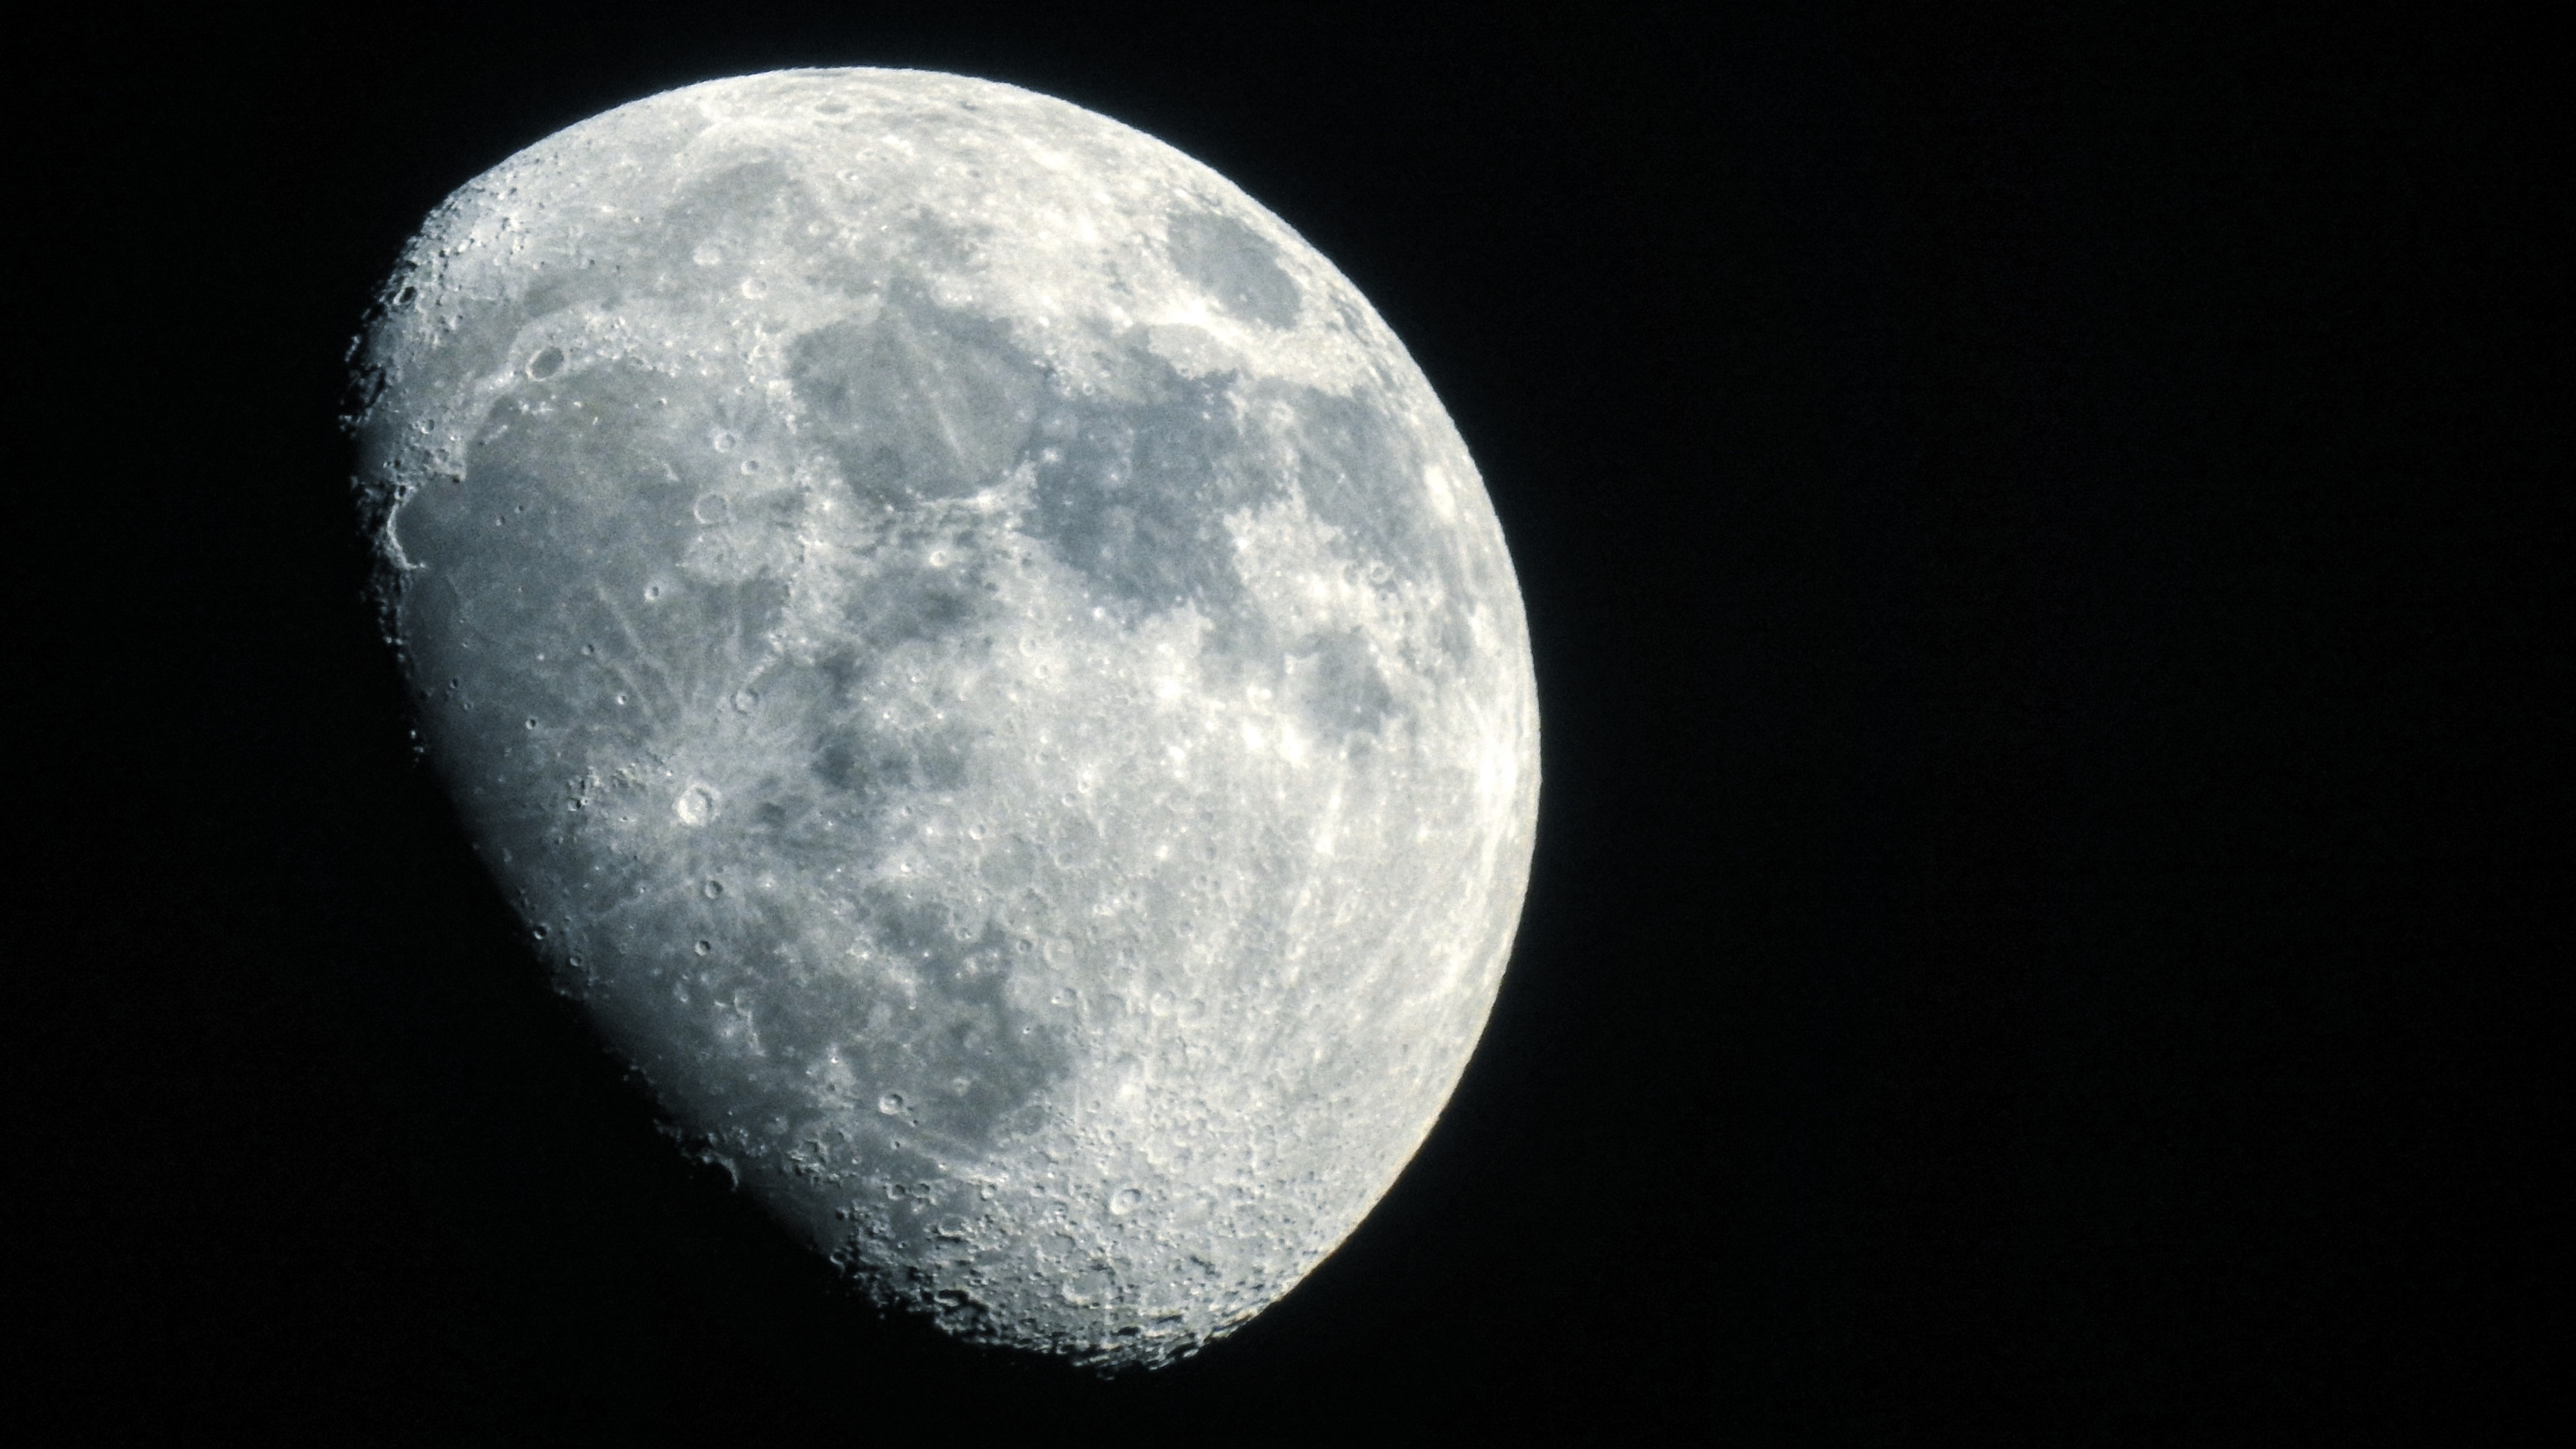 My most detailed shot of the moon taken yet with a 300mm lens and a ...